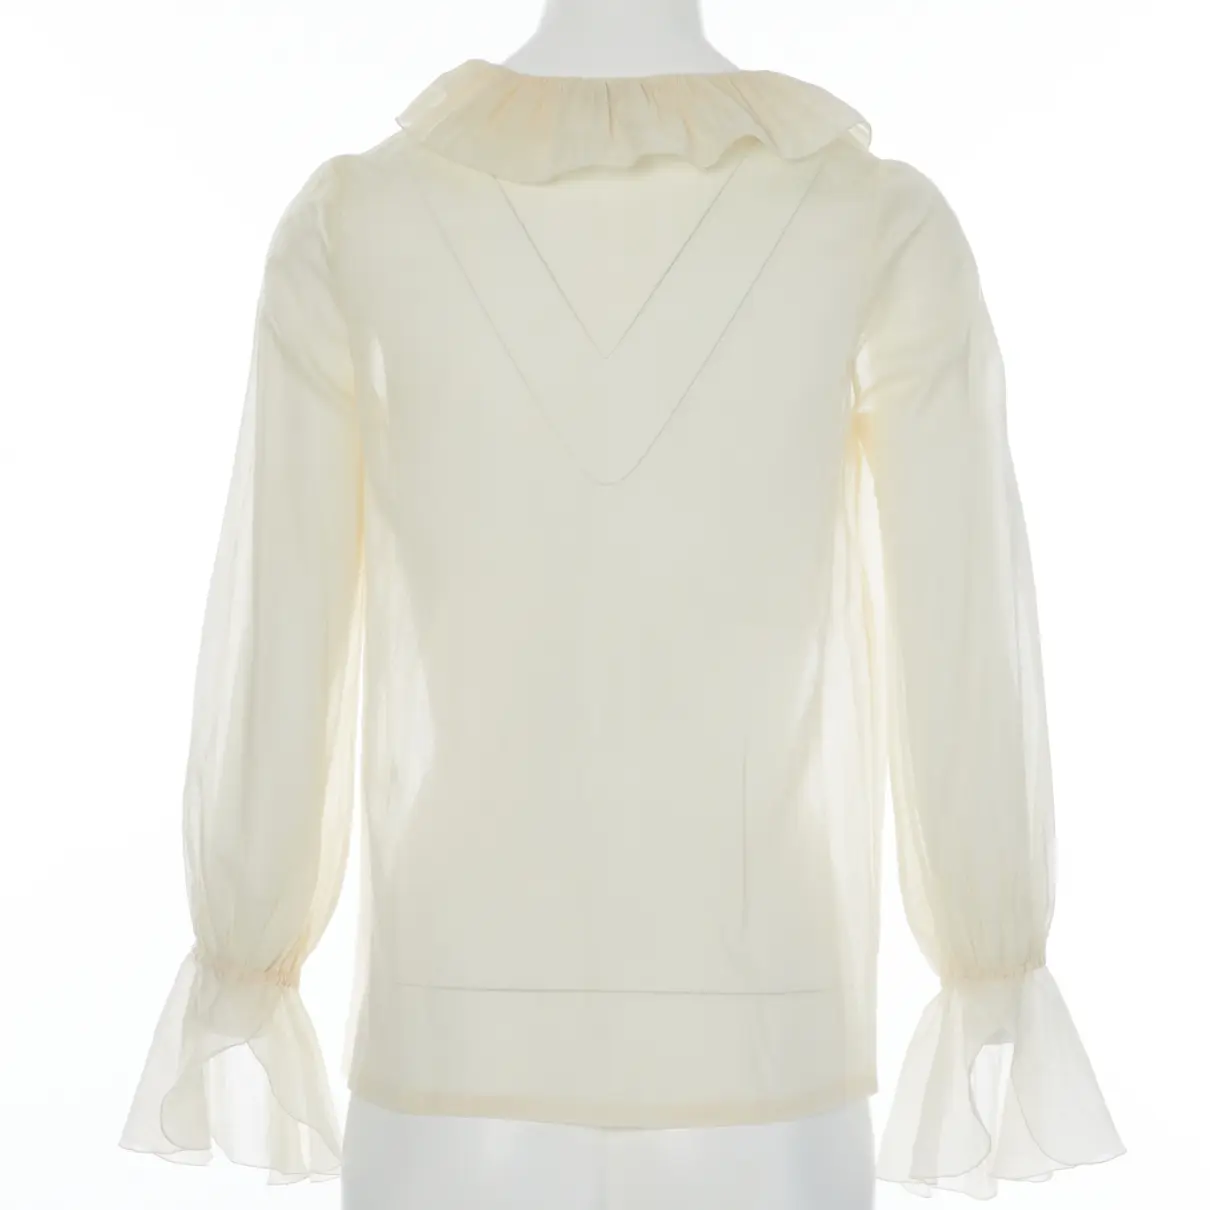 Buy Givenchy Blouse online